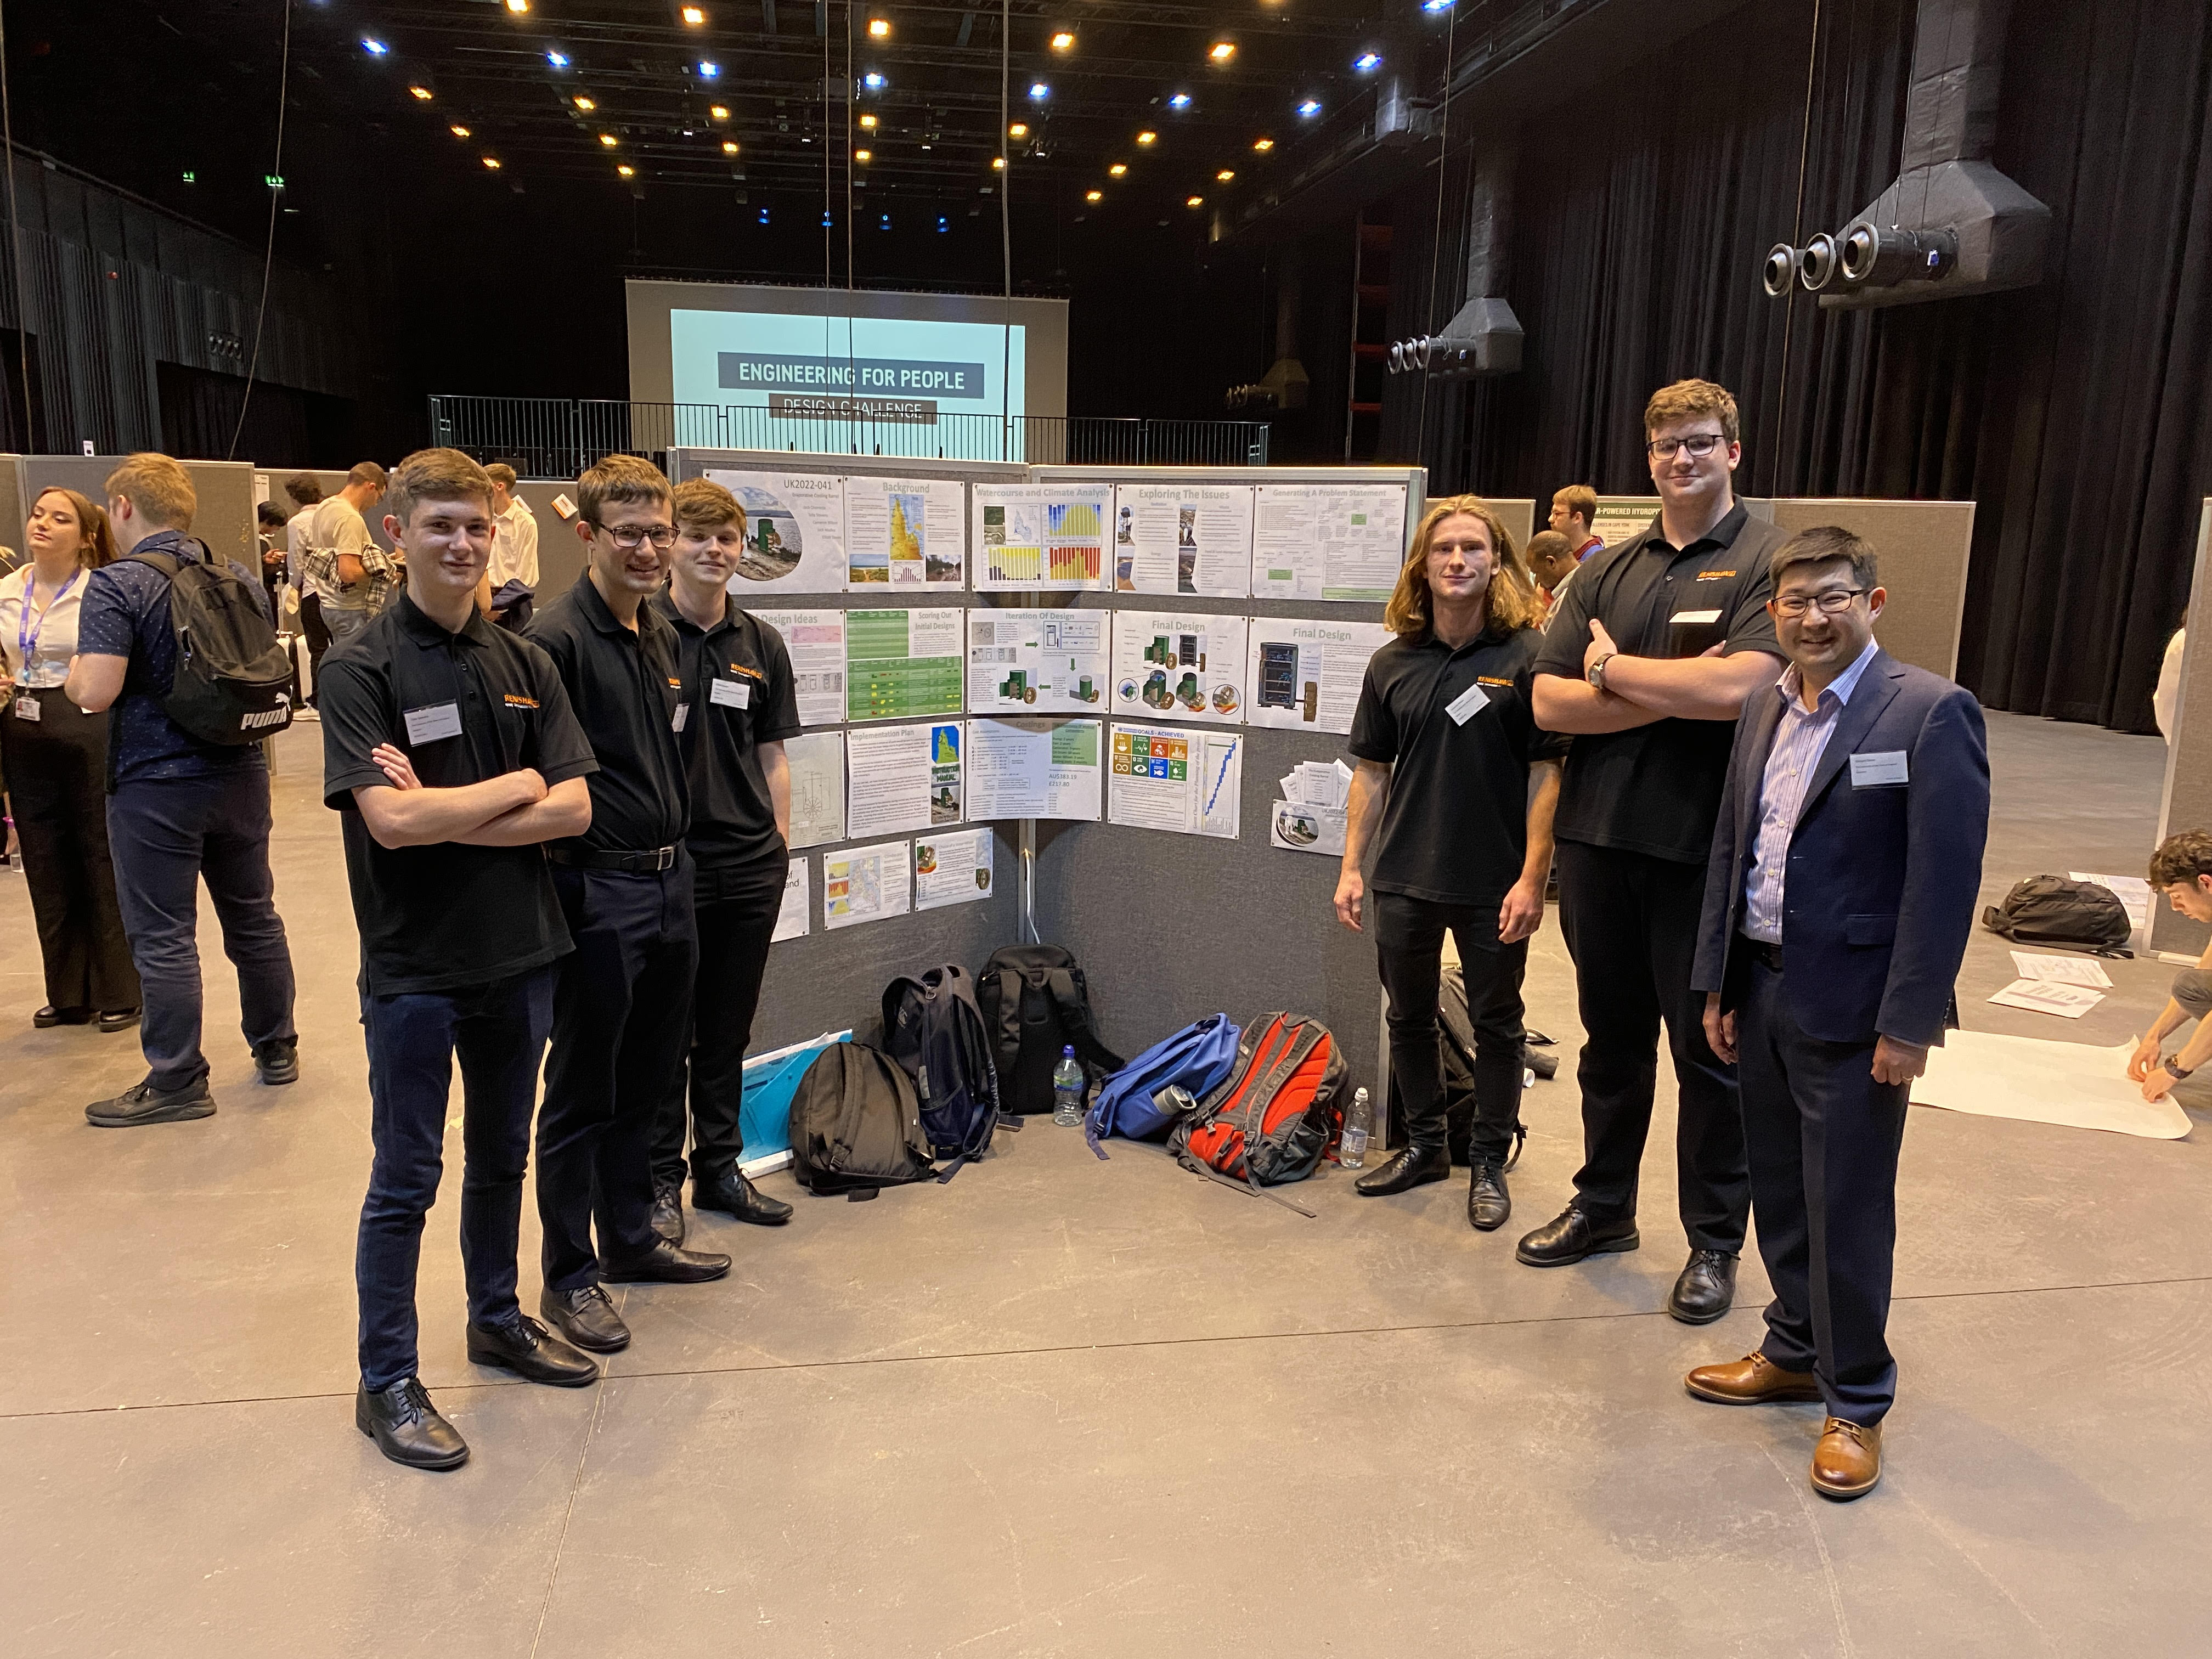 Degree apprentices win People’s Prize at the Engineering for People Design Challenge